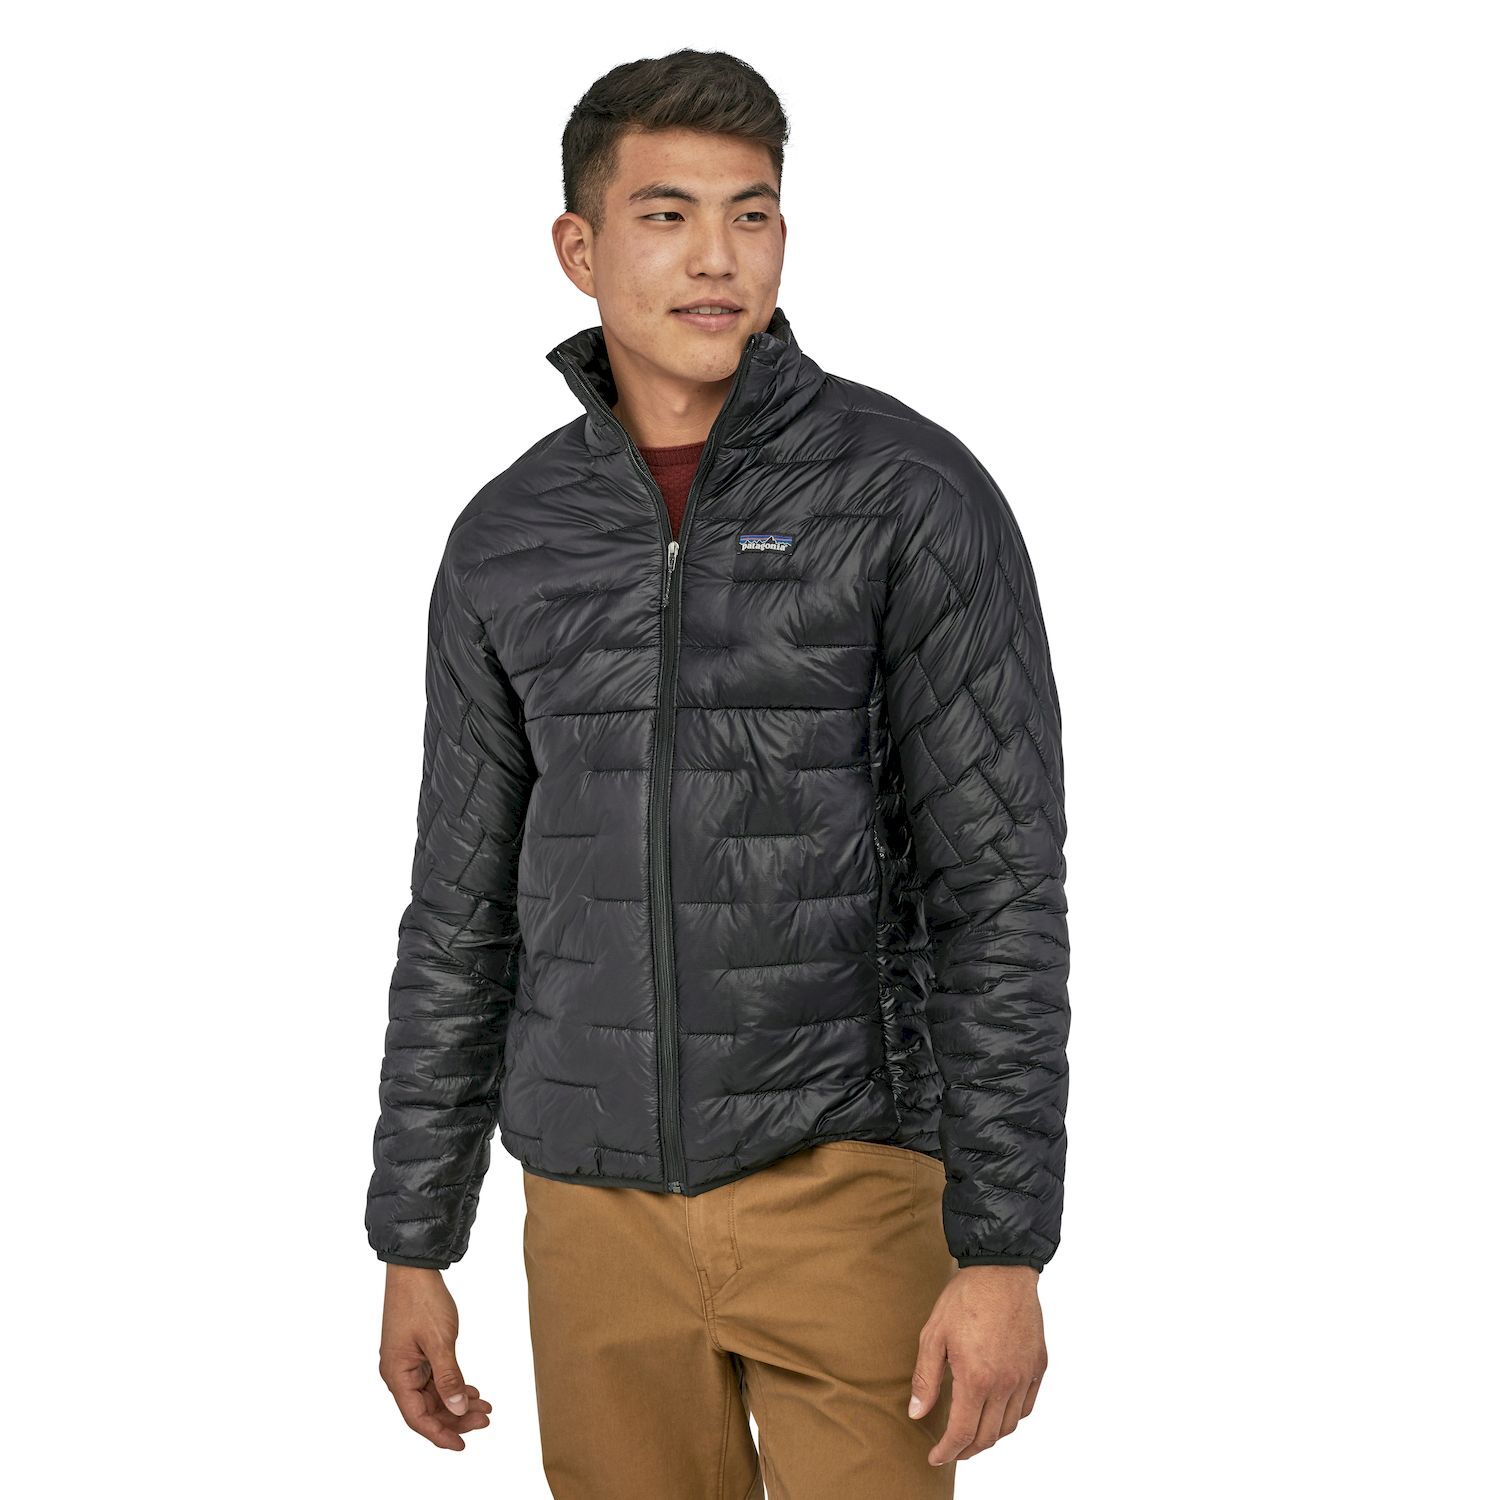 Patagonia - Micro Puff Jkt - Insulated jacket - Men's